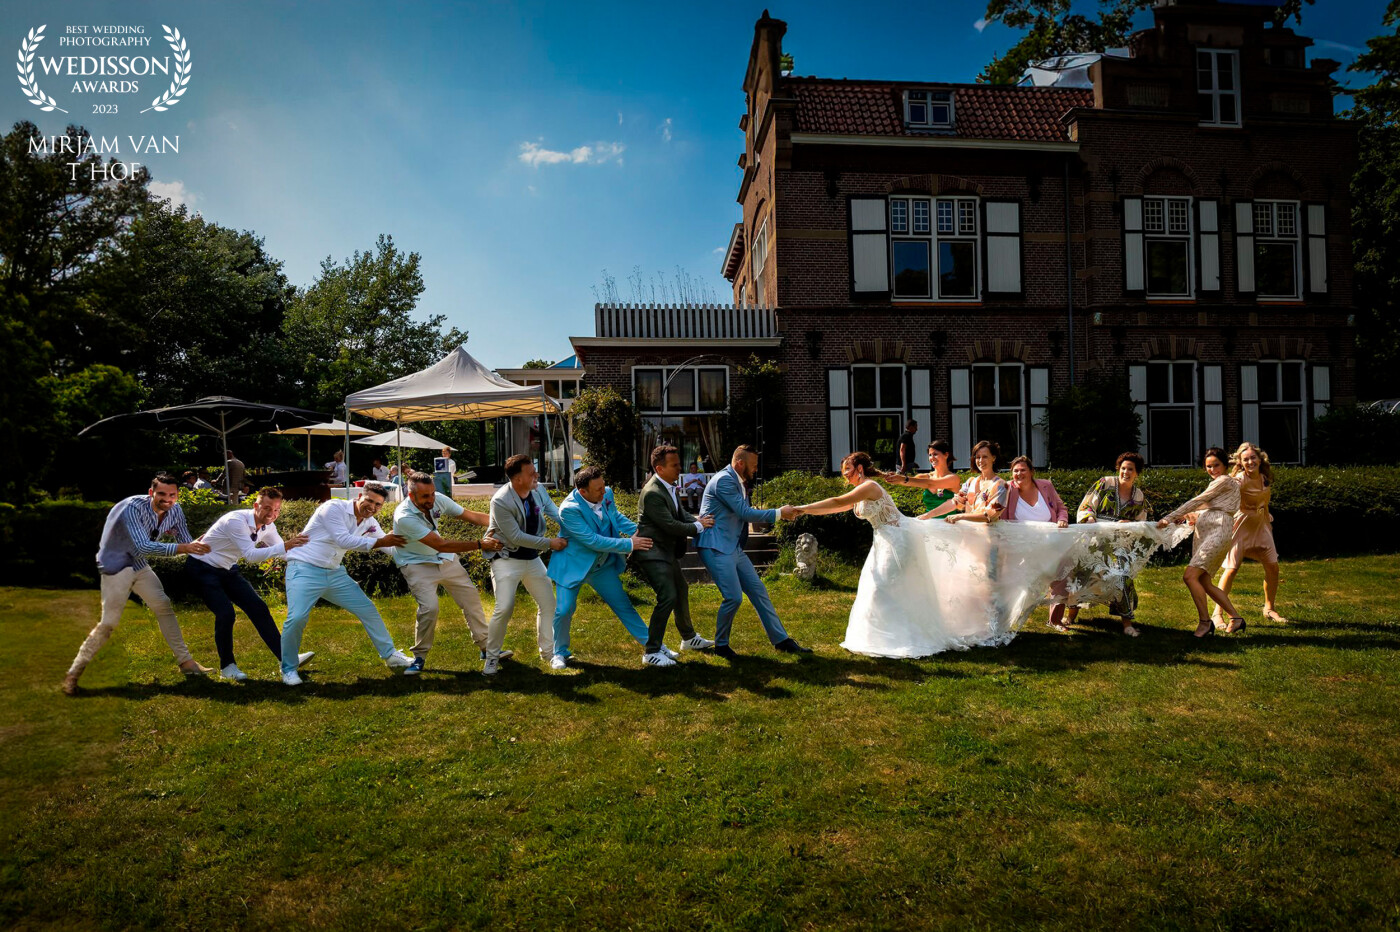 I really love to have fun at a wedding! Just take a different turn with the group photos and call all the friends of the bride and groom to just act a bit crazy and this was the result!<br />
Really loved it!